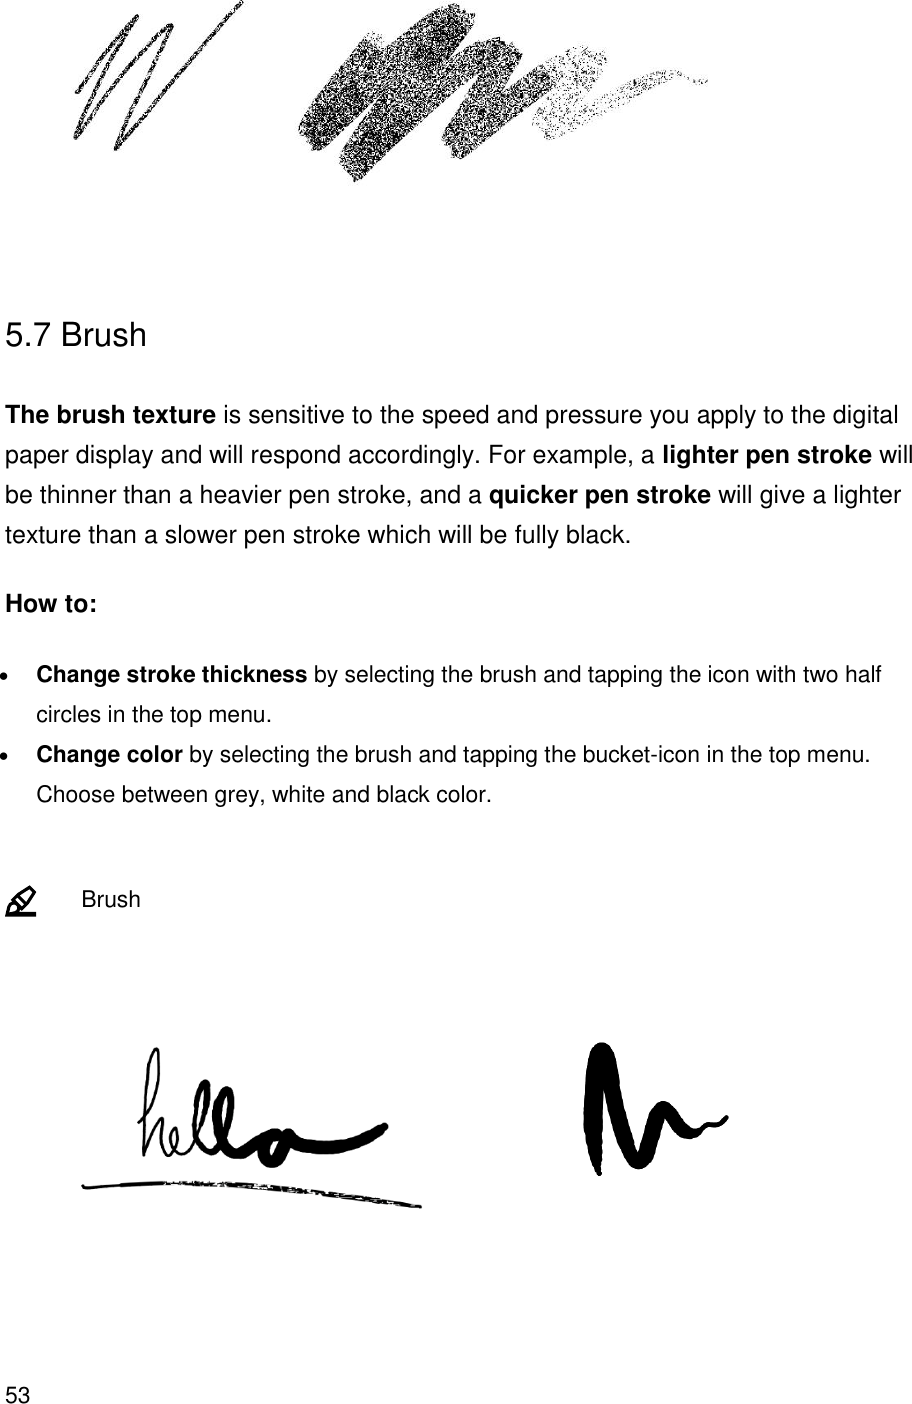 53   5.7 Brush  The brush texture is sensitive to the speed and pressure you apply to the digital paper display and will respond accordingly. For example, a lighter pen stroke will be thinner than a heavier pen stroke, and a quicker pen stroke will give a lighter texture than a slower pen stroke which will be fully black. How to: • Change stroke thickness by selecting the brush and tapping the icon with two half circles in the top menu. • Change color by selecting the brush and tapping the bucket-icon in the top menu. Choose between grey, white and black color.      Brush            